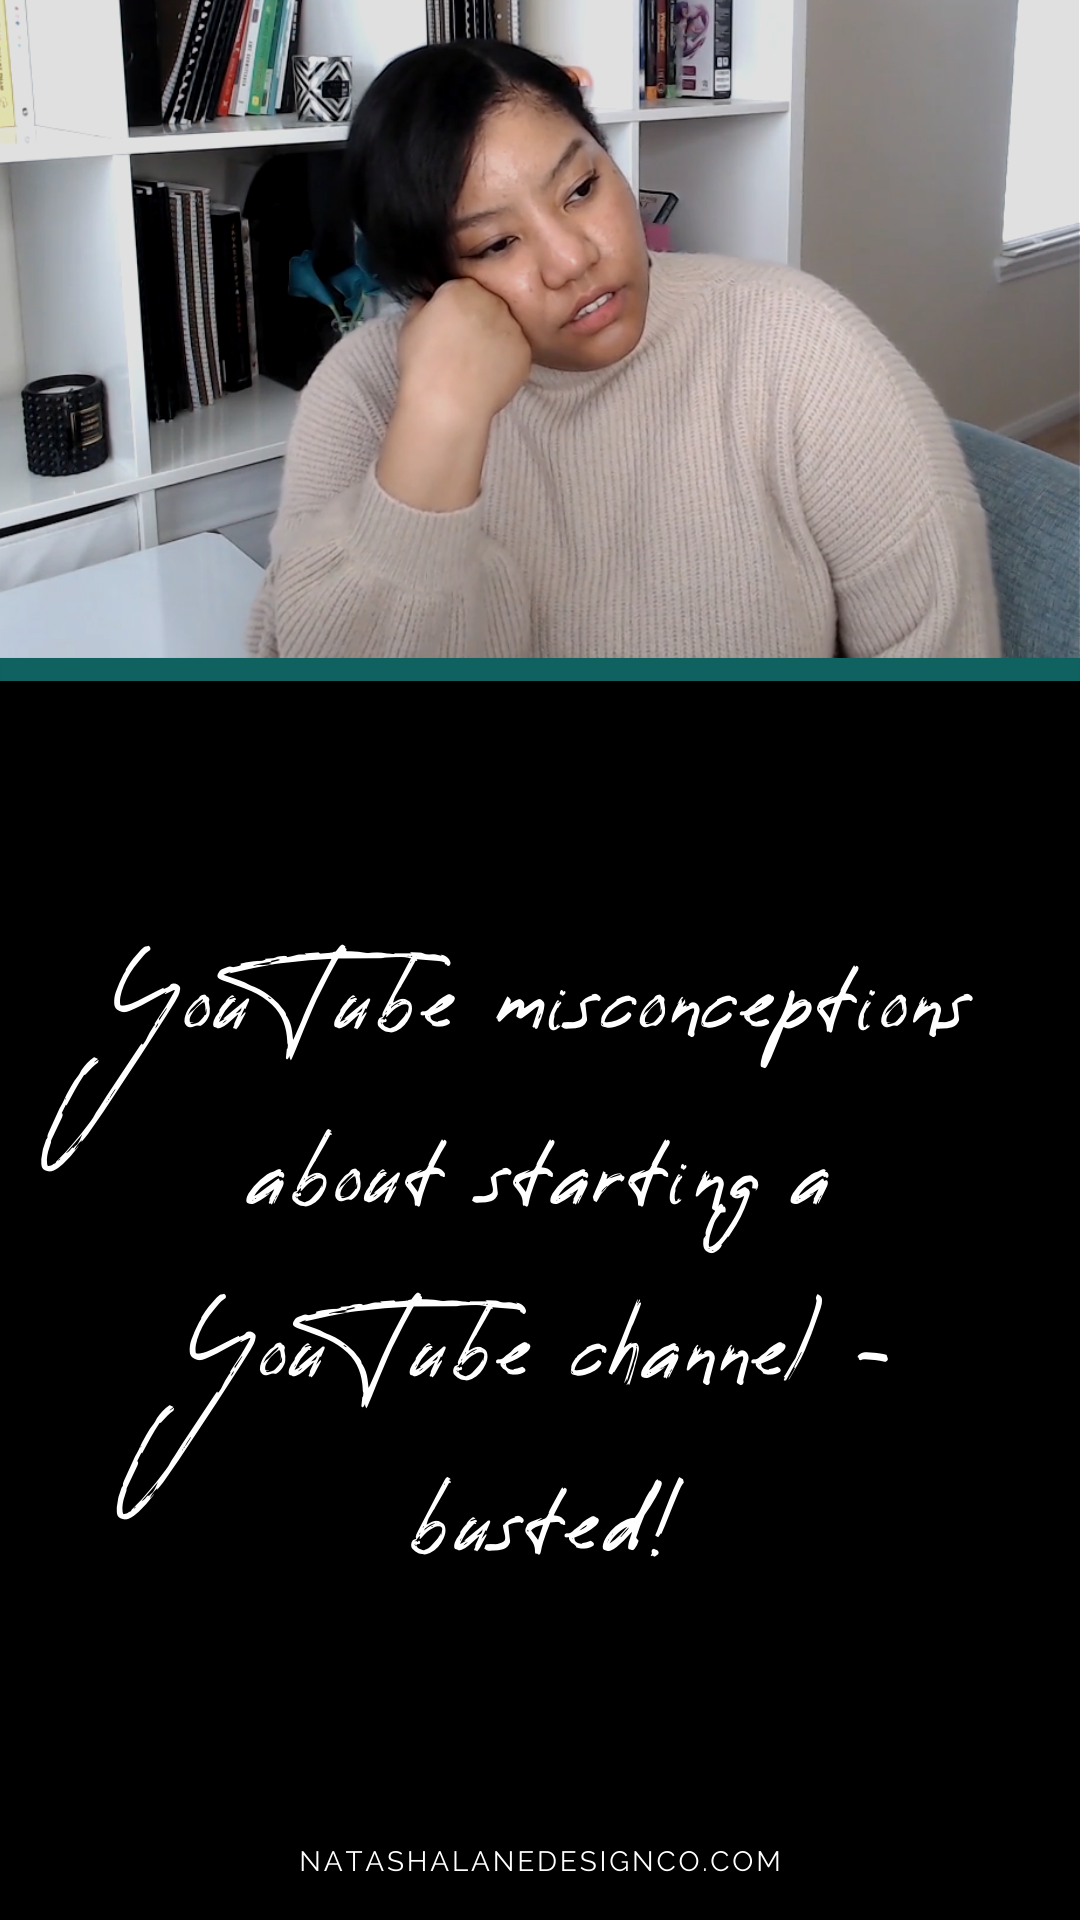 7 YouTube misconceptions about starting a YouTube channel - busted!